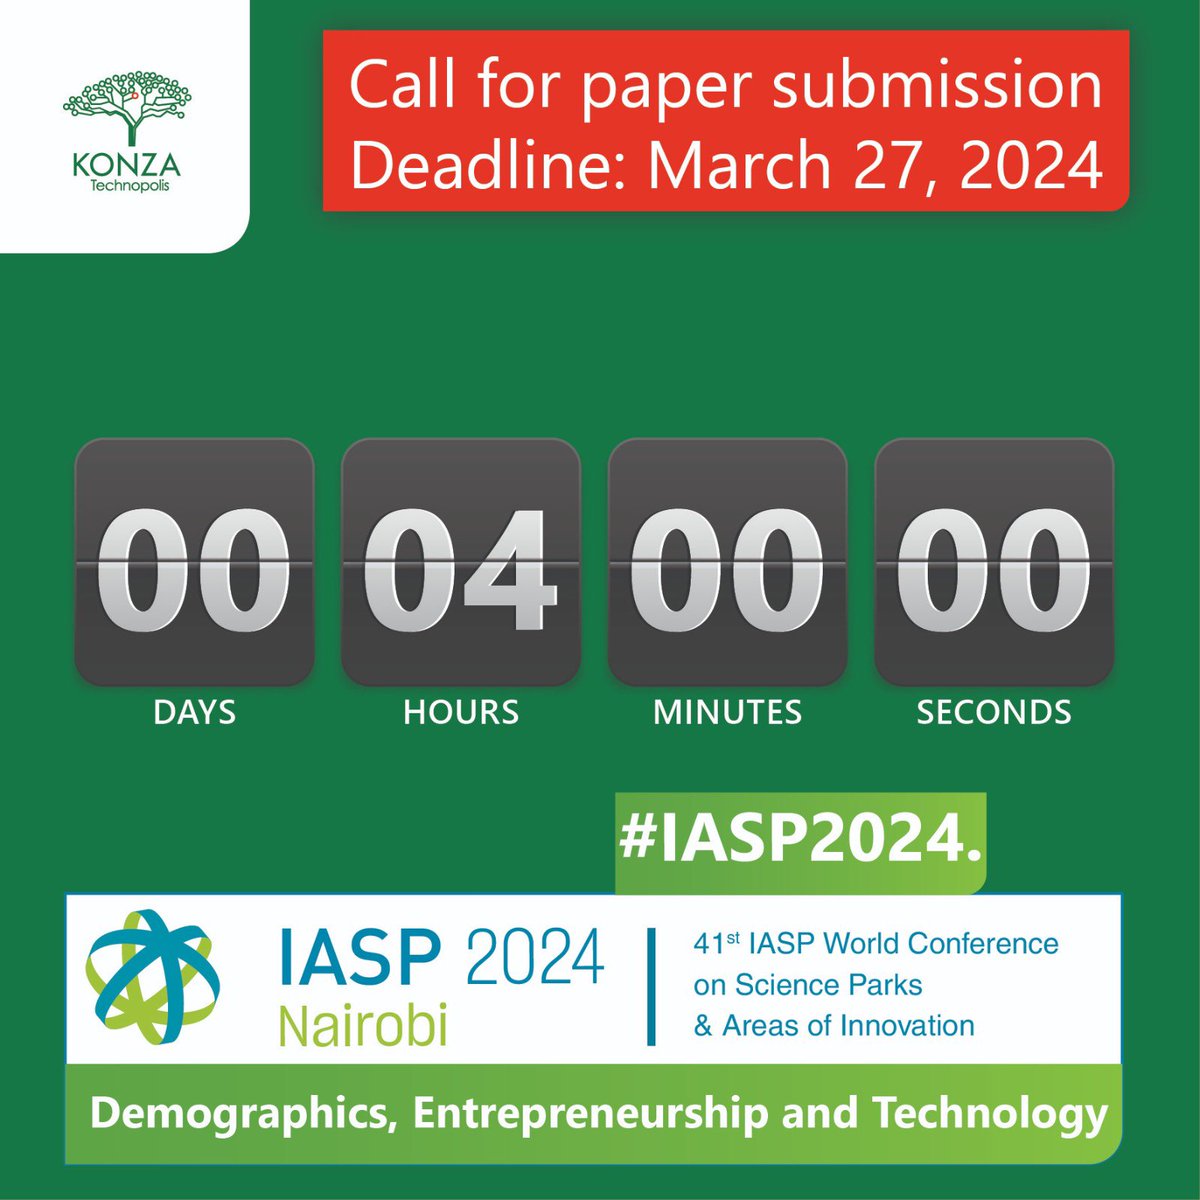 It’s the final stretch! 4 hours left to submit your papers for IASP 2024. Your research deserves a global platform. Hurry, the clock is ticking! 
@IASPnetwork @MoICTKenya @ICTAuthorityKE @ODPC_KE @nacosti @KENIAupdates @jpokwiri @tanuijohn 
#IASP2024 #SubmitNow